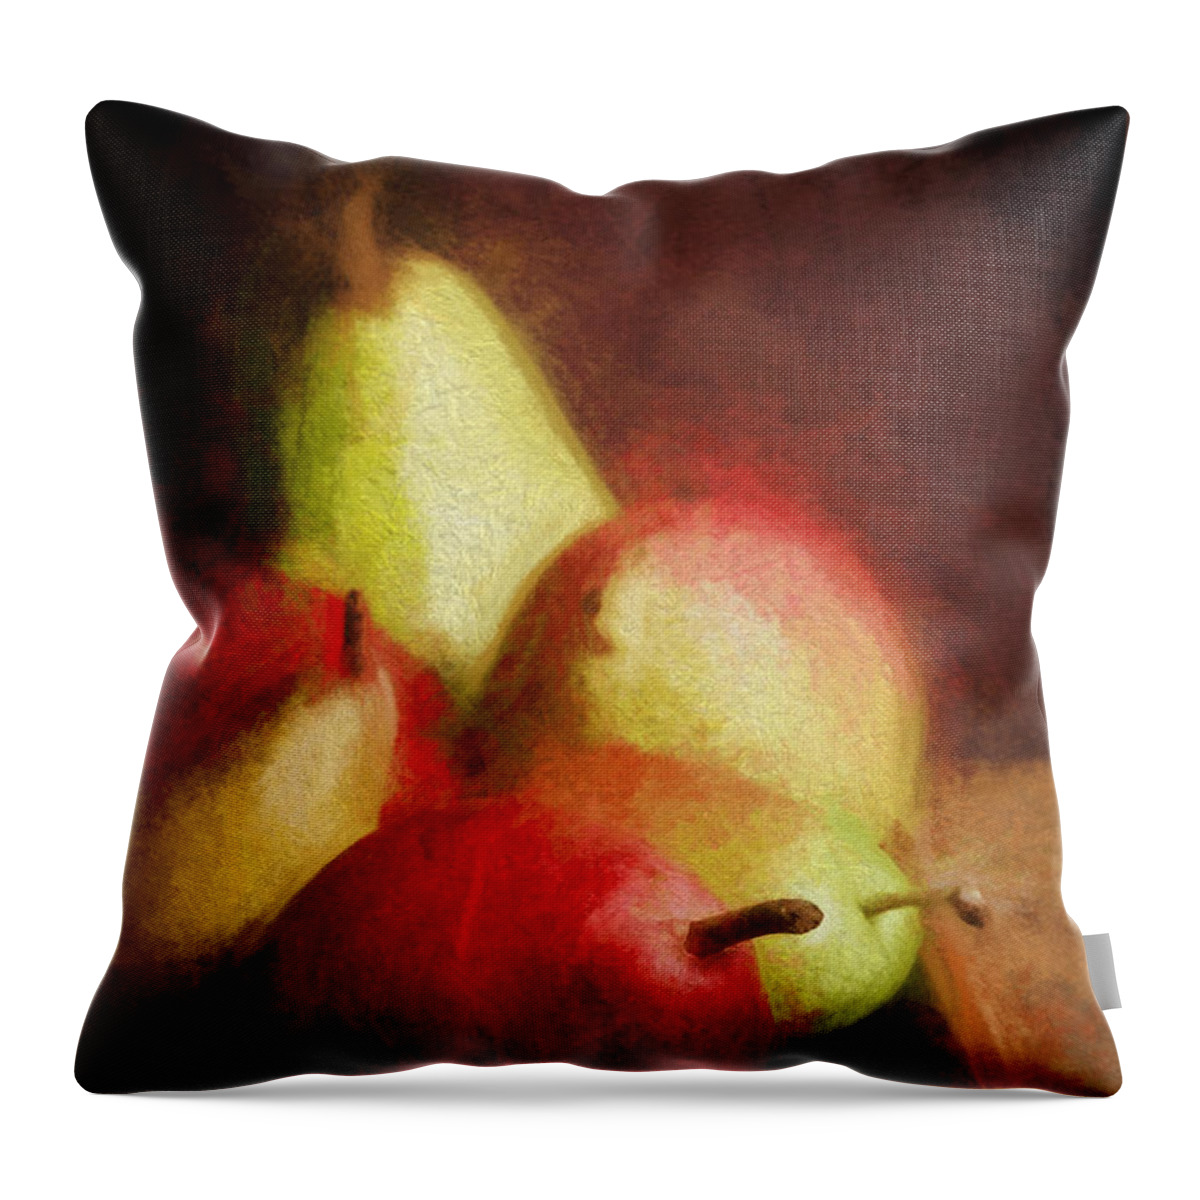 Pears Throw Pillow featuring the painting Pears #3 by HD Connelly